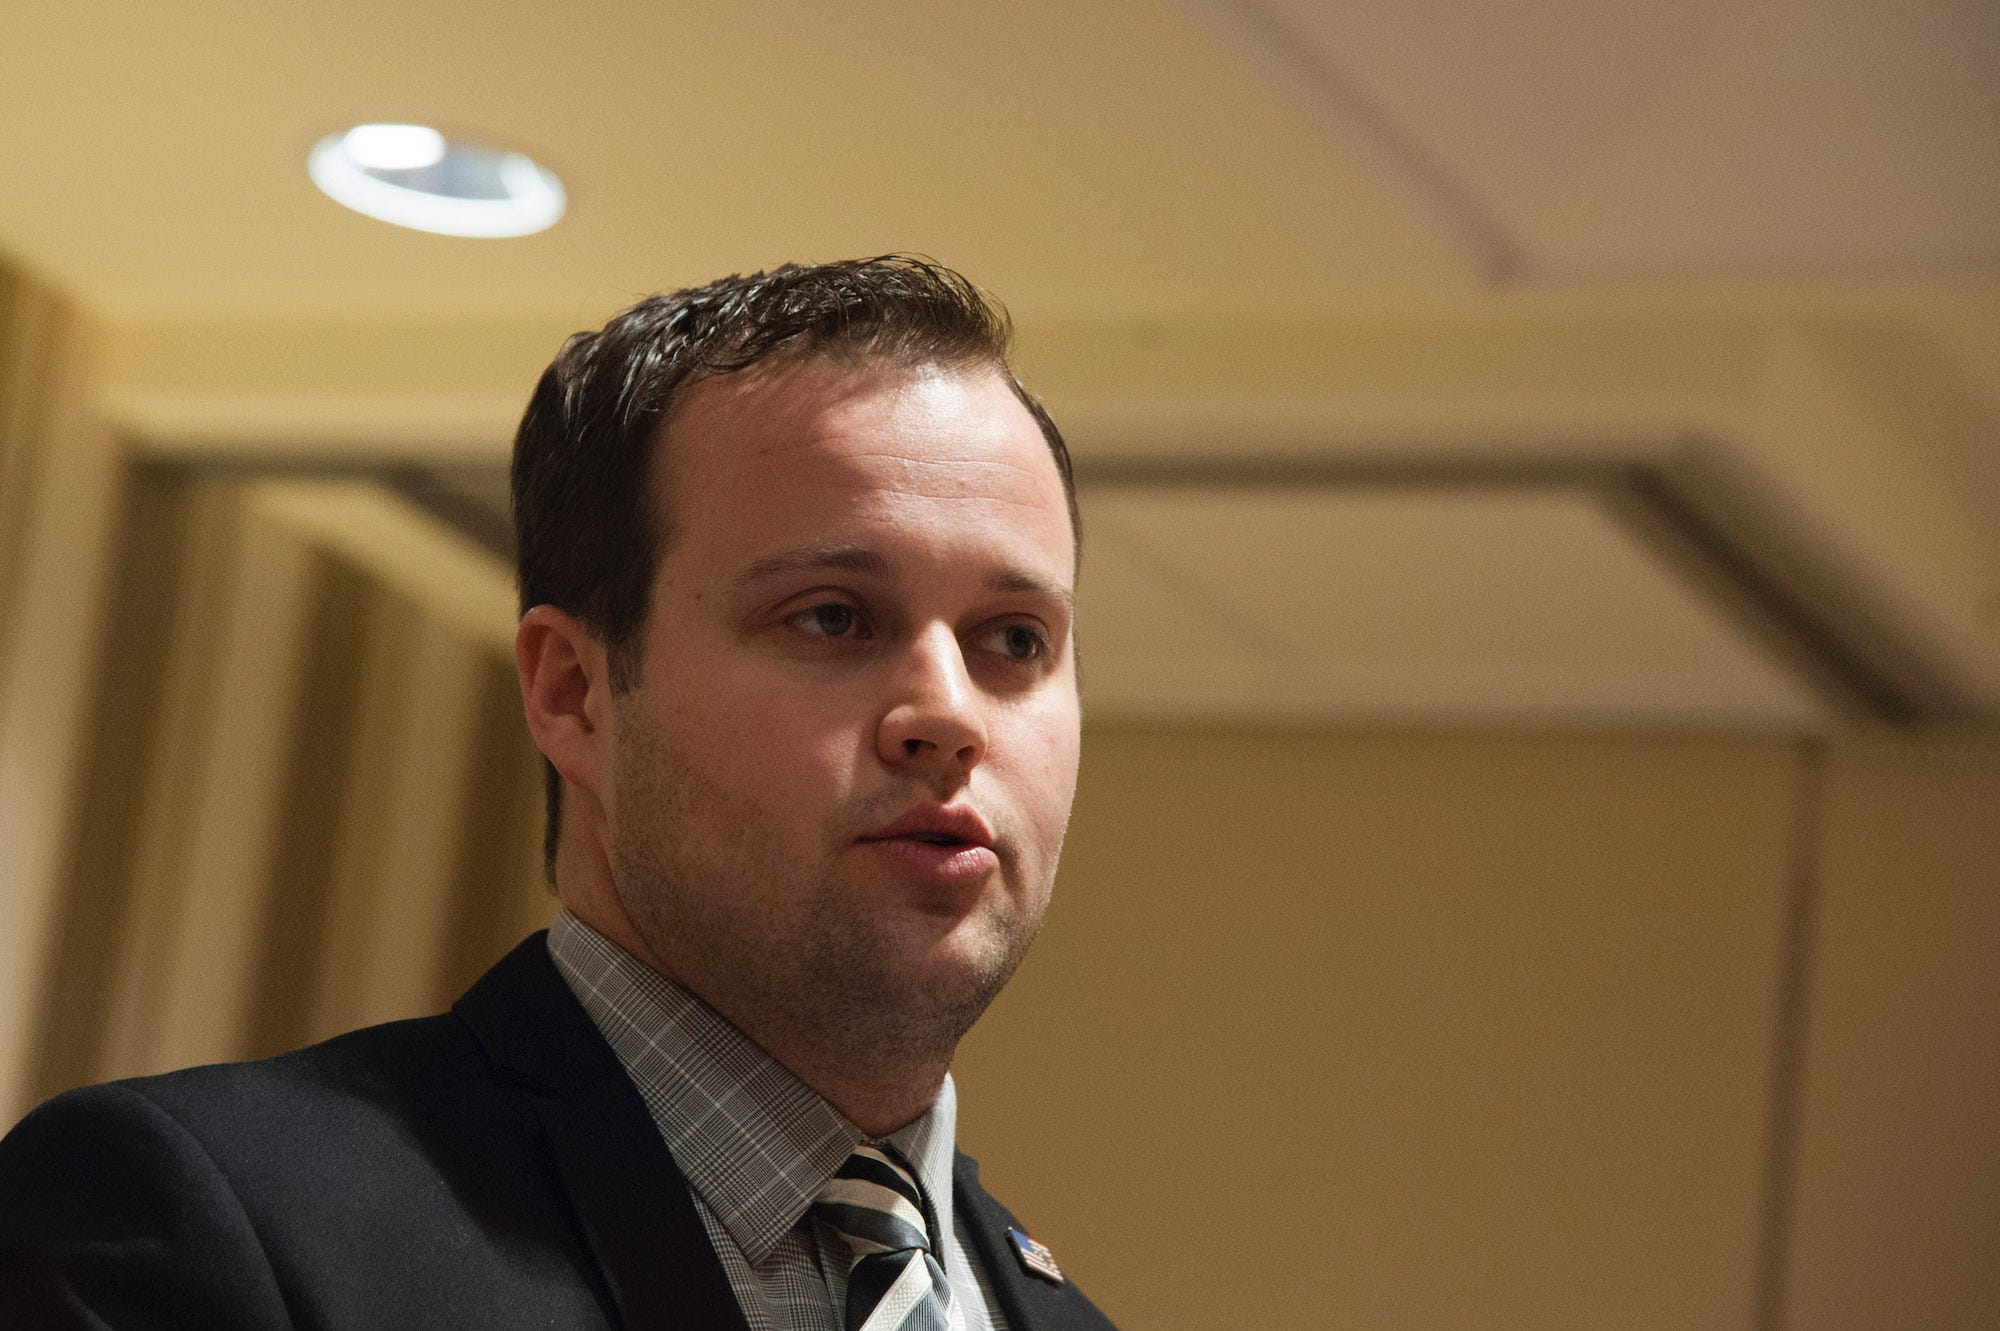 A DOJ forensic investigator told the Josh Duggar trial that the child porn video evidence is among the 'most offensive' he'd ever seen